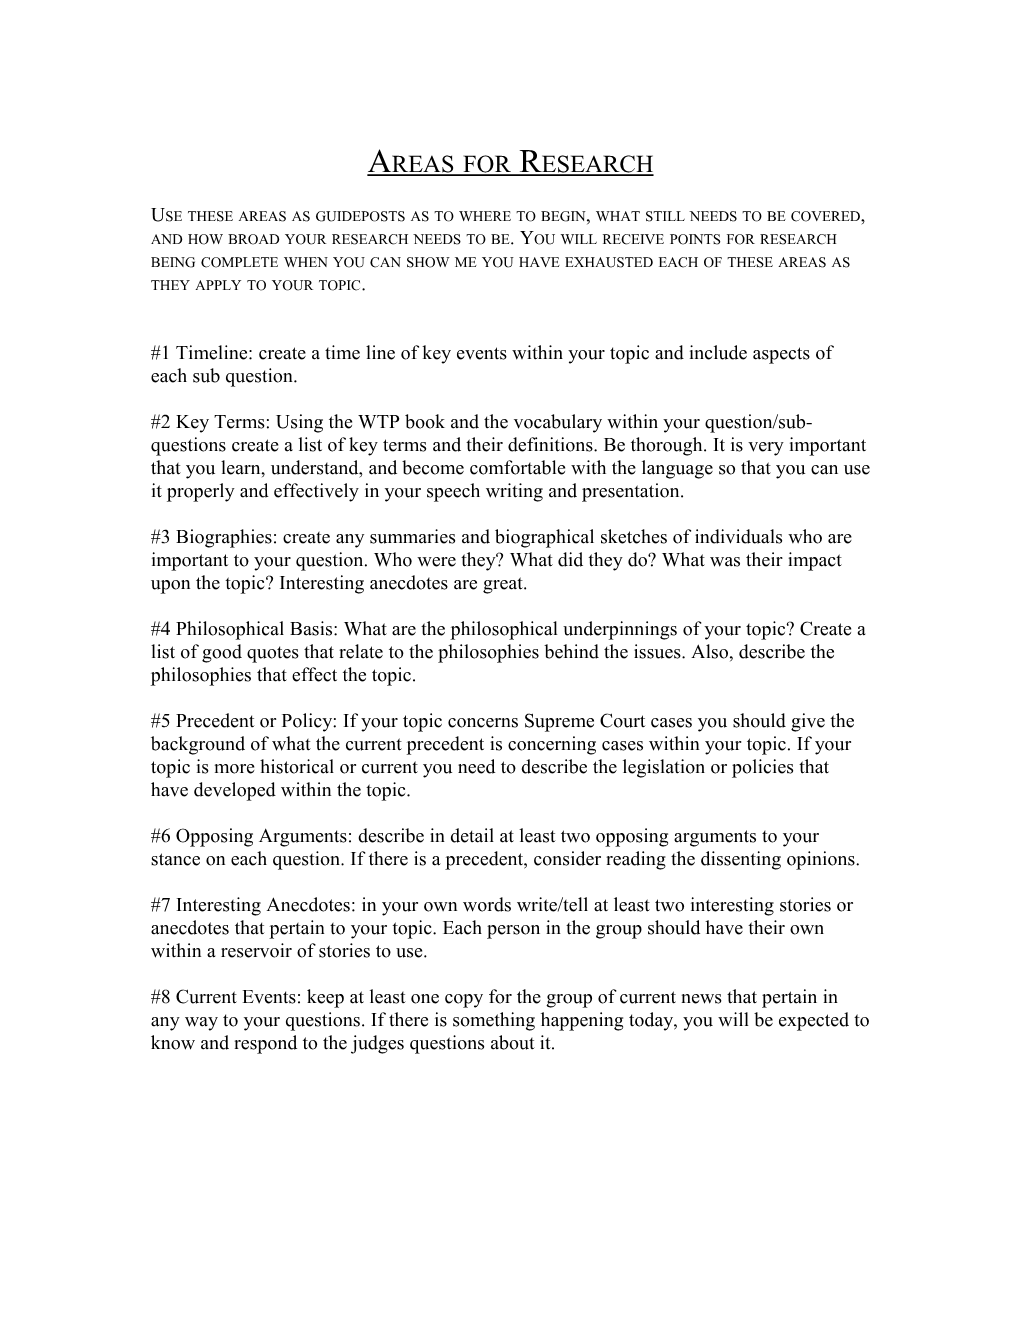 Areas for Research